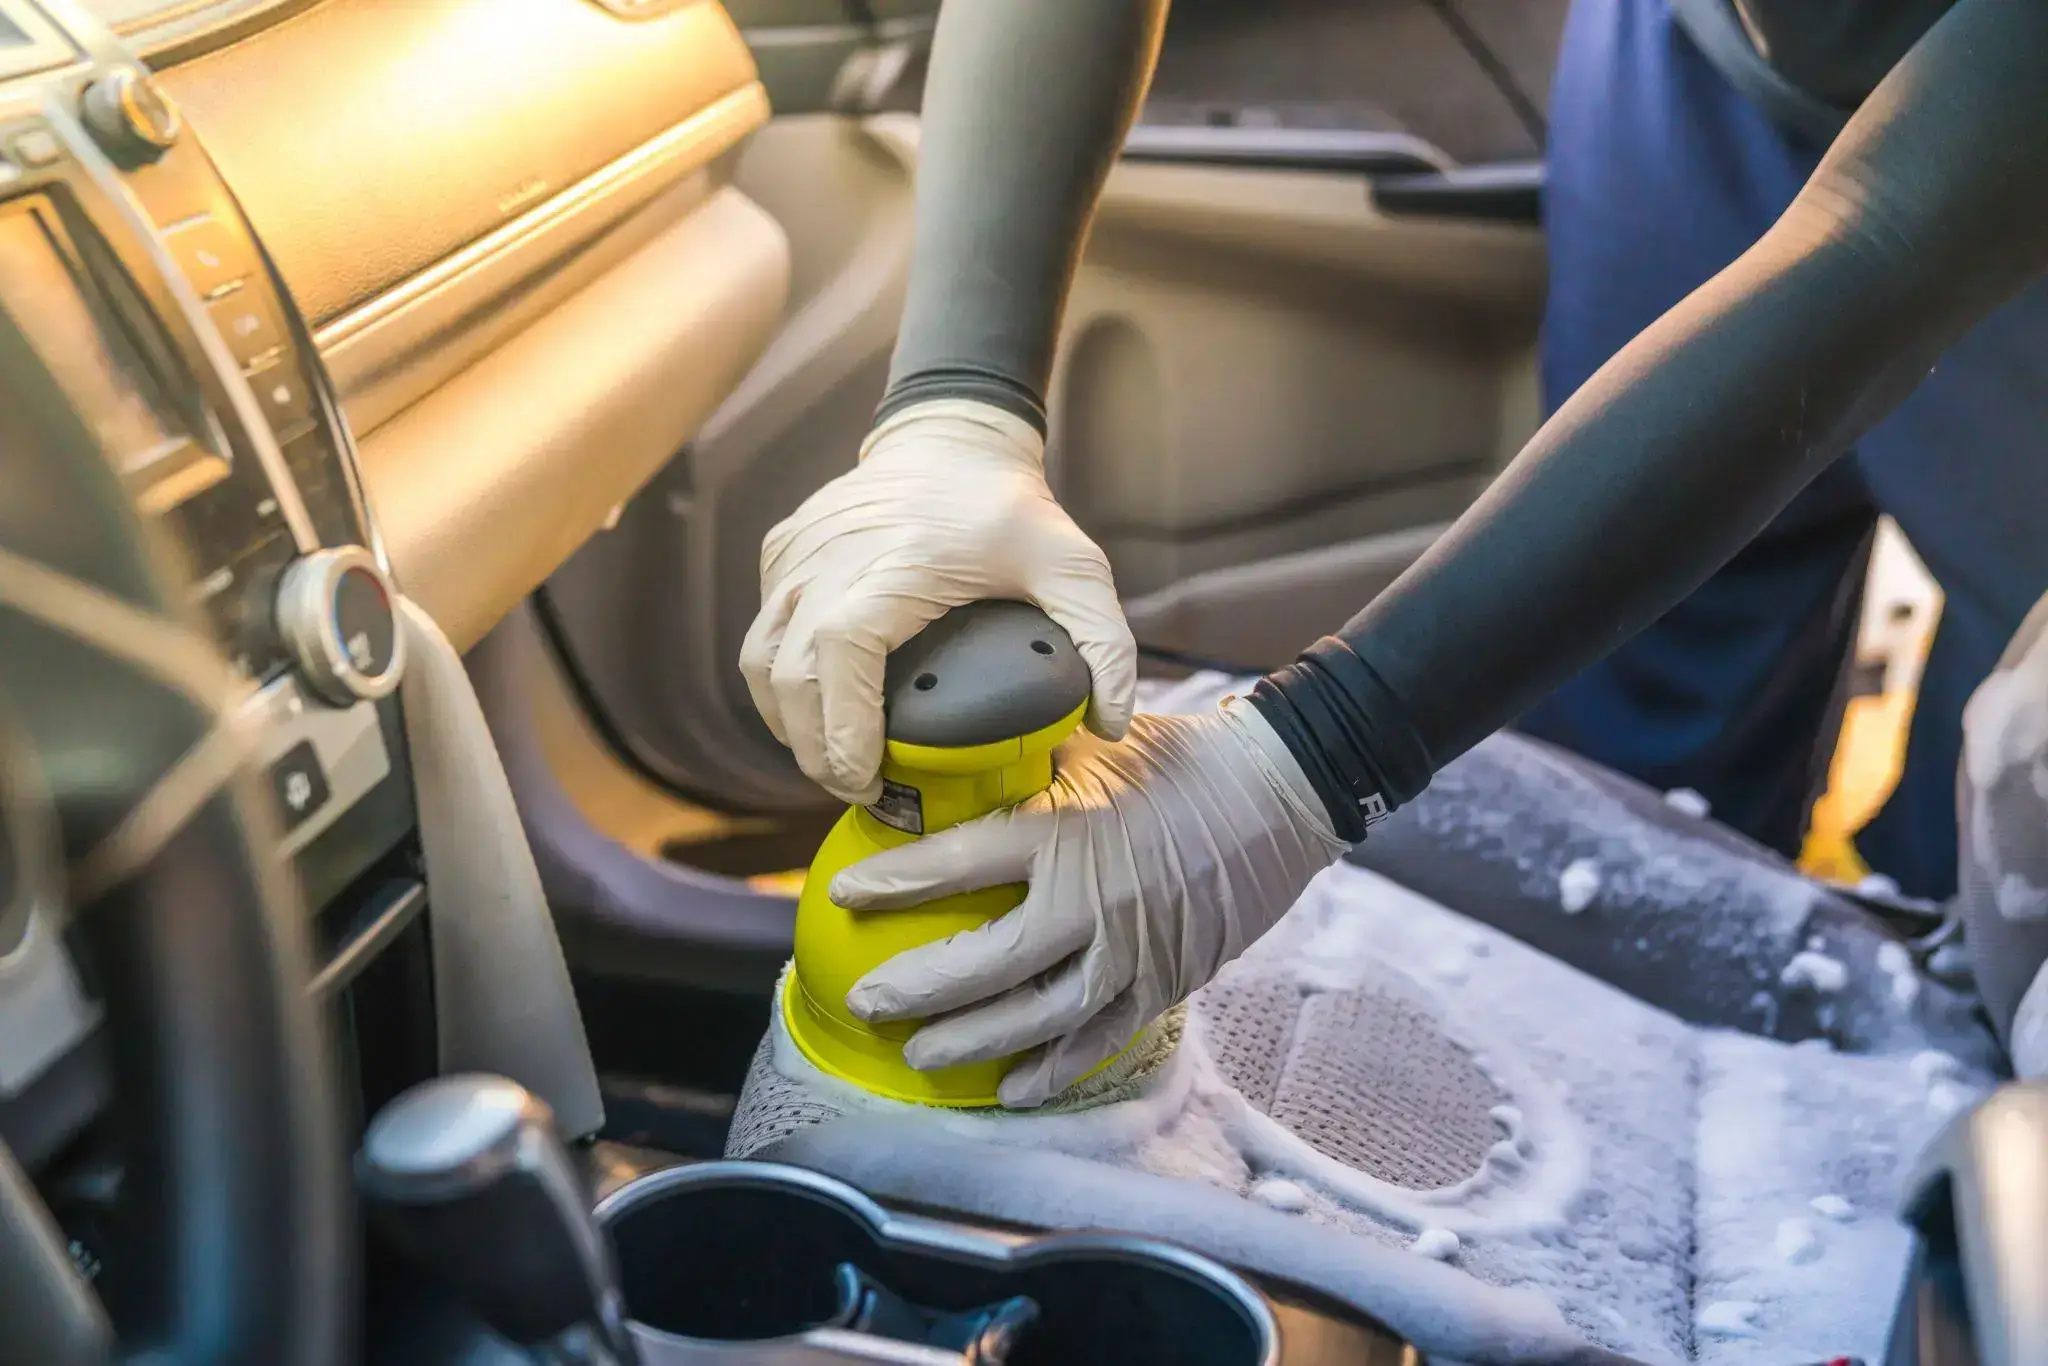 Driving can be more relaxing and enjoyable when the interior of the car is clean.